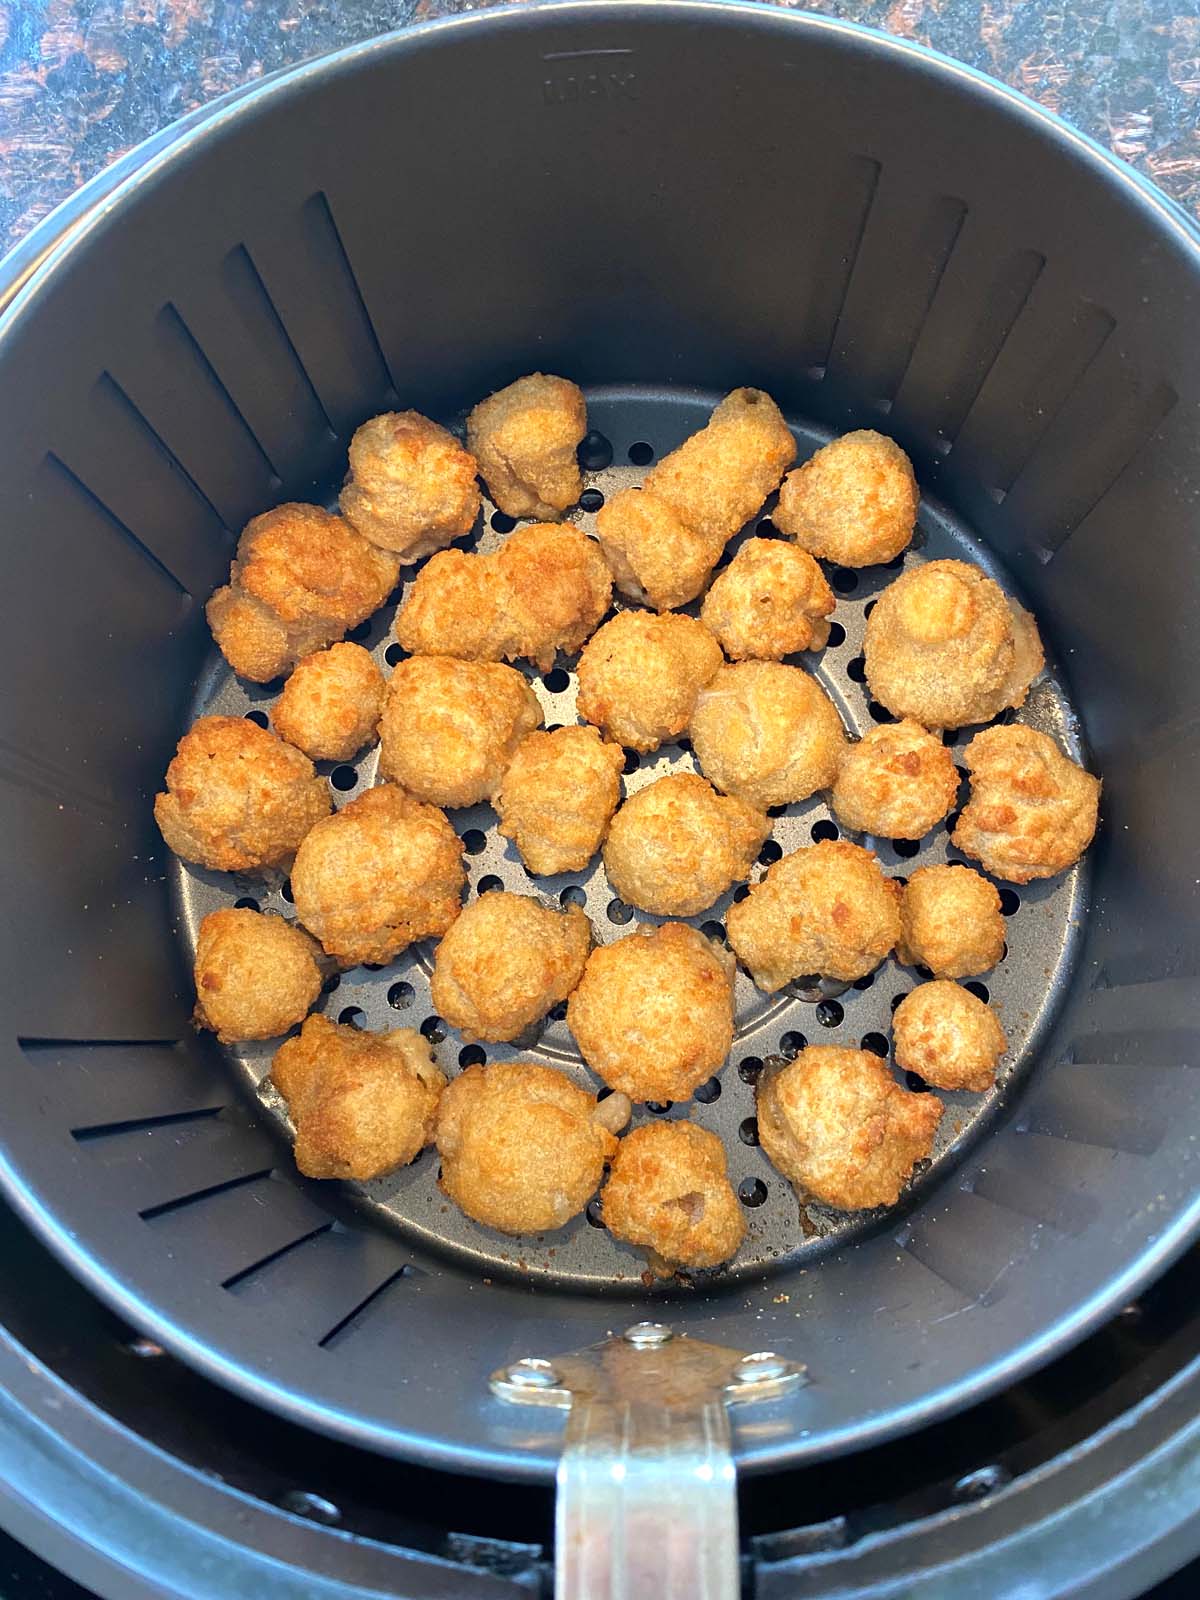 Cooked breaded mushrooms in the air fryer.